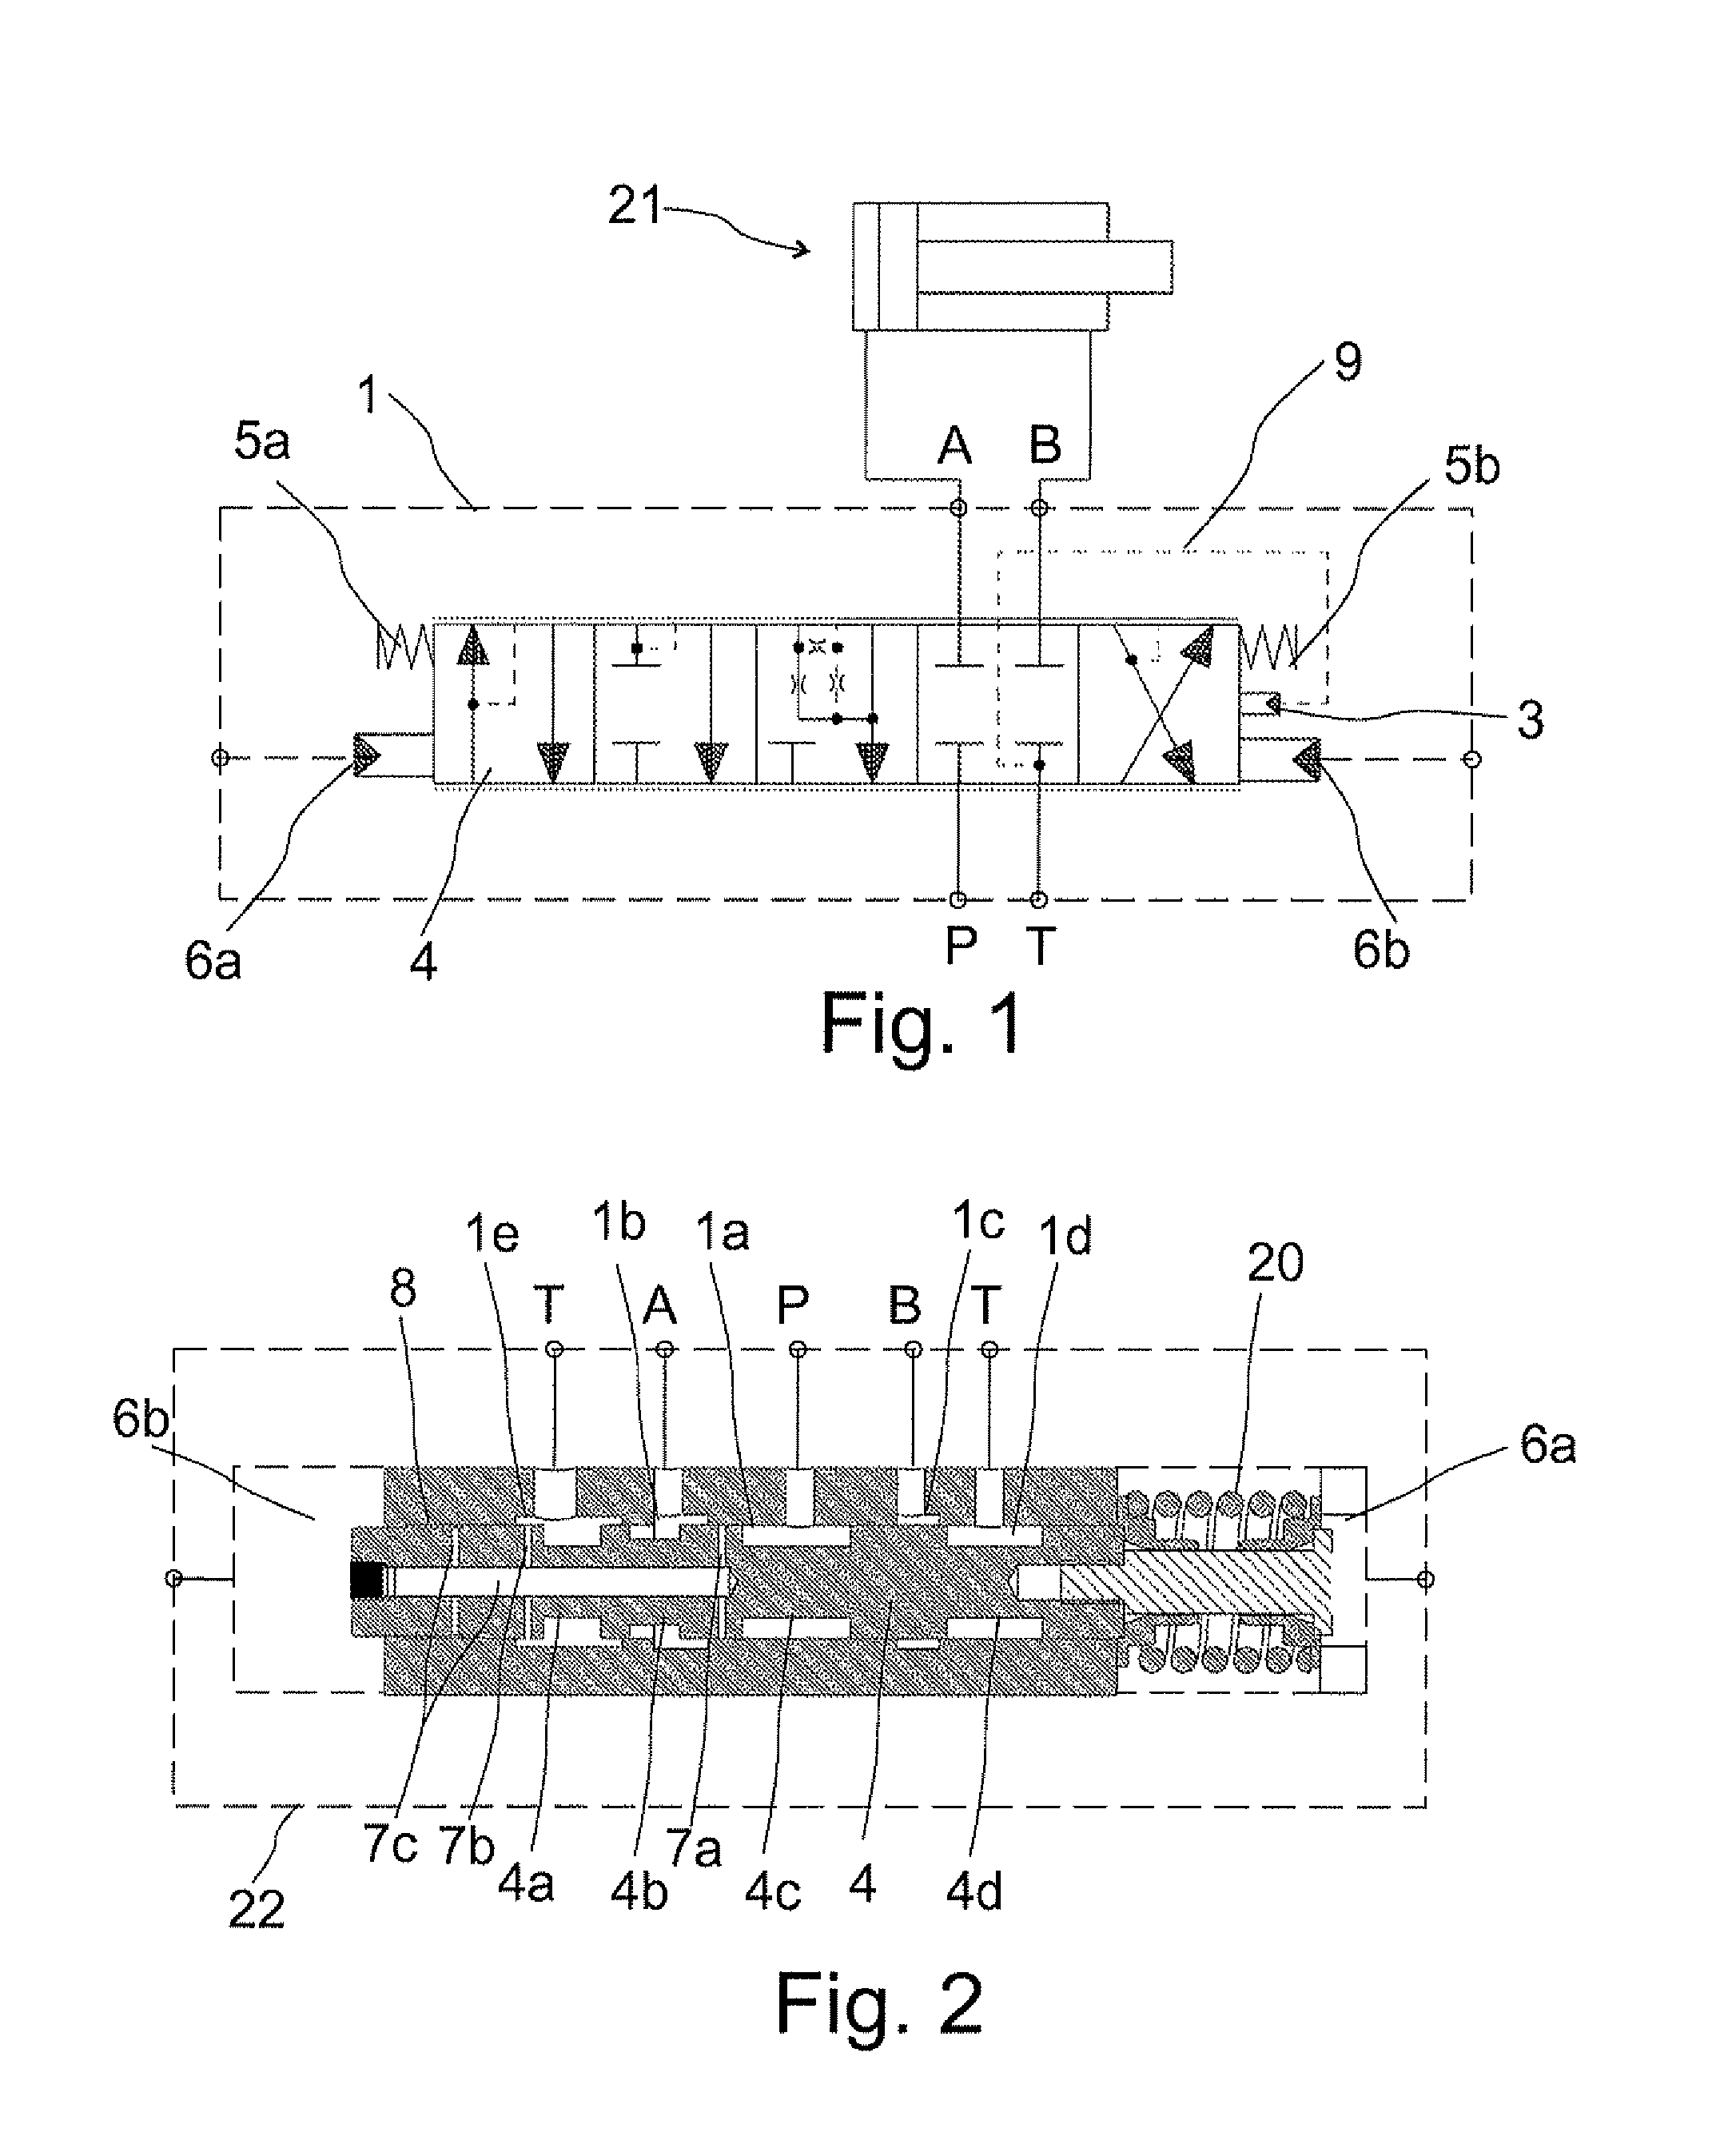 Directional valve equipped with pressure control